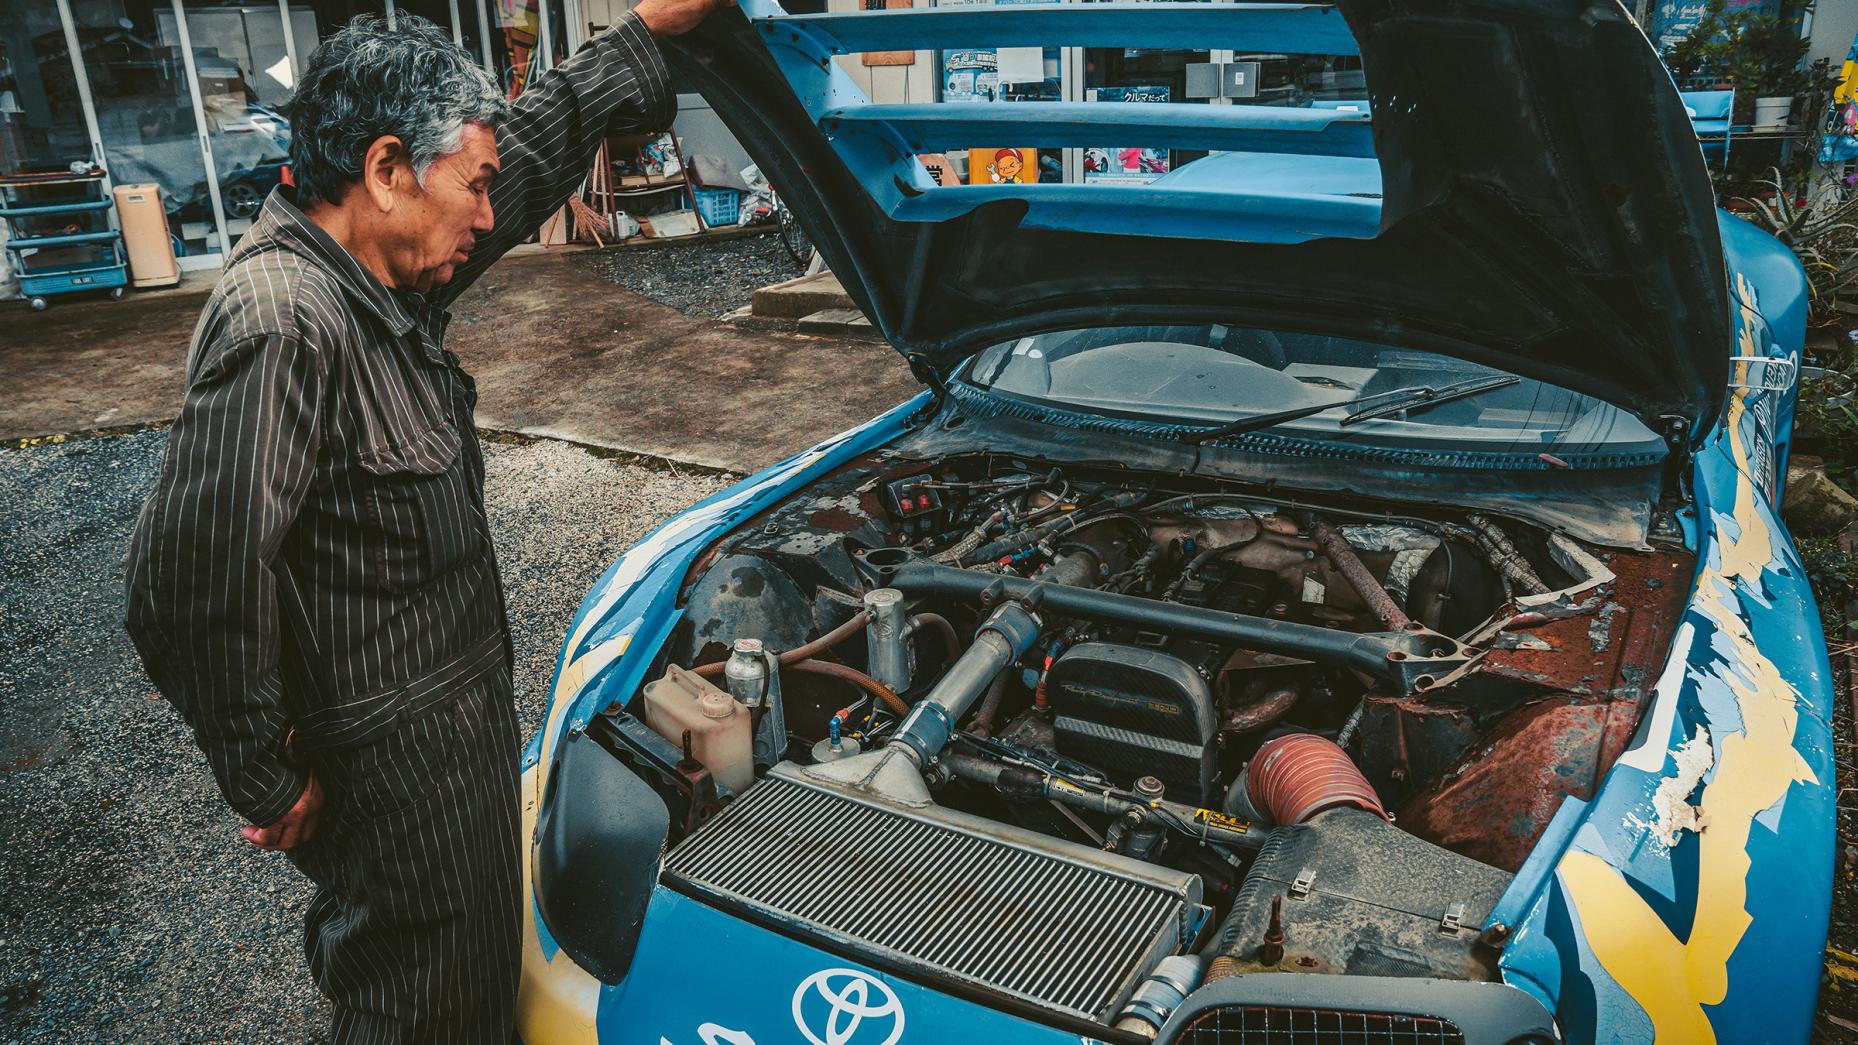 This Toyota Supra has been abandoned for over 15 years